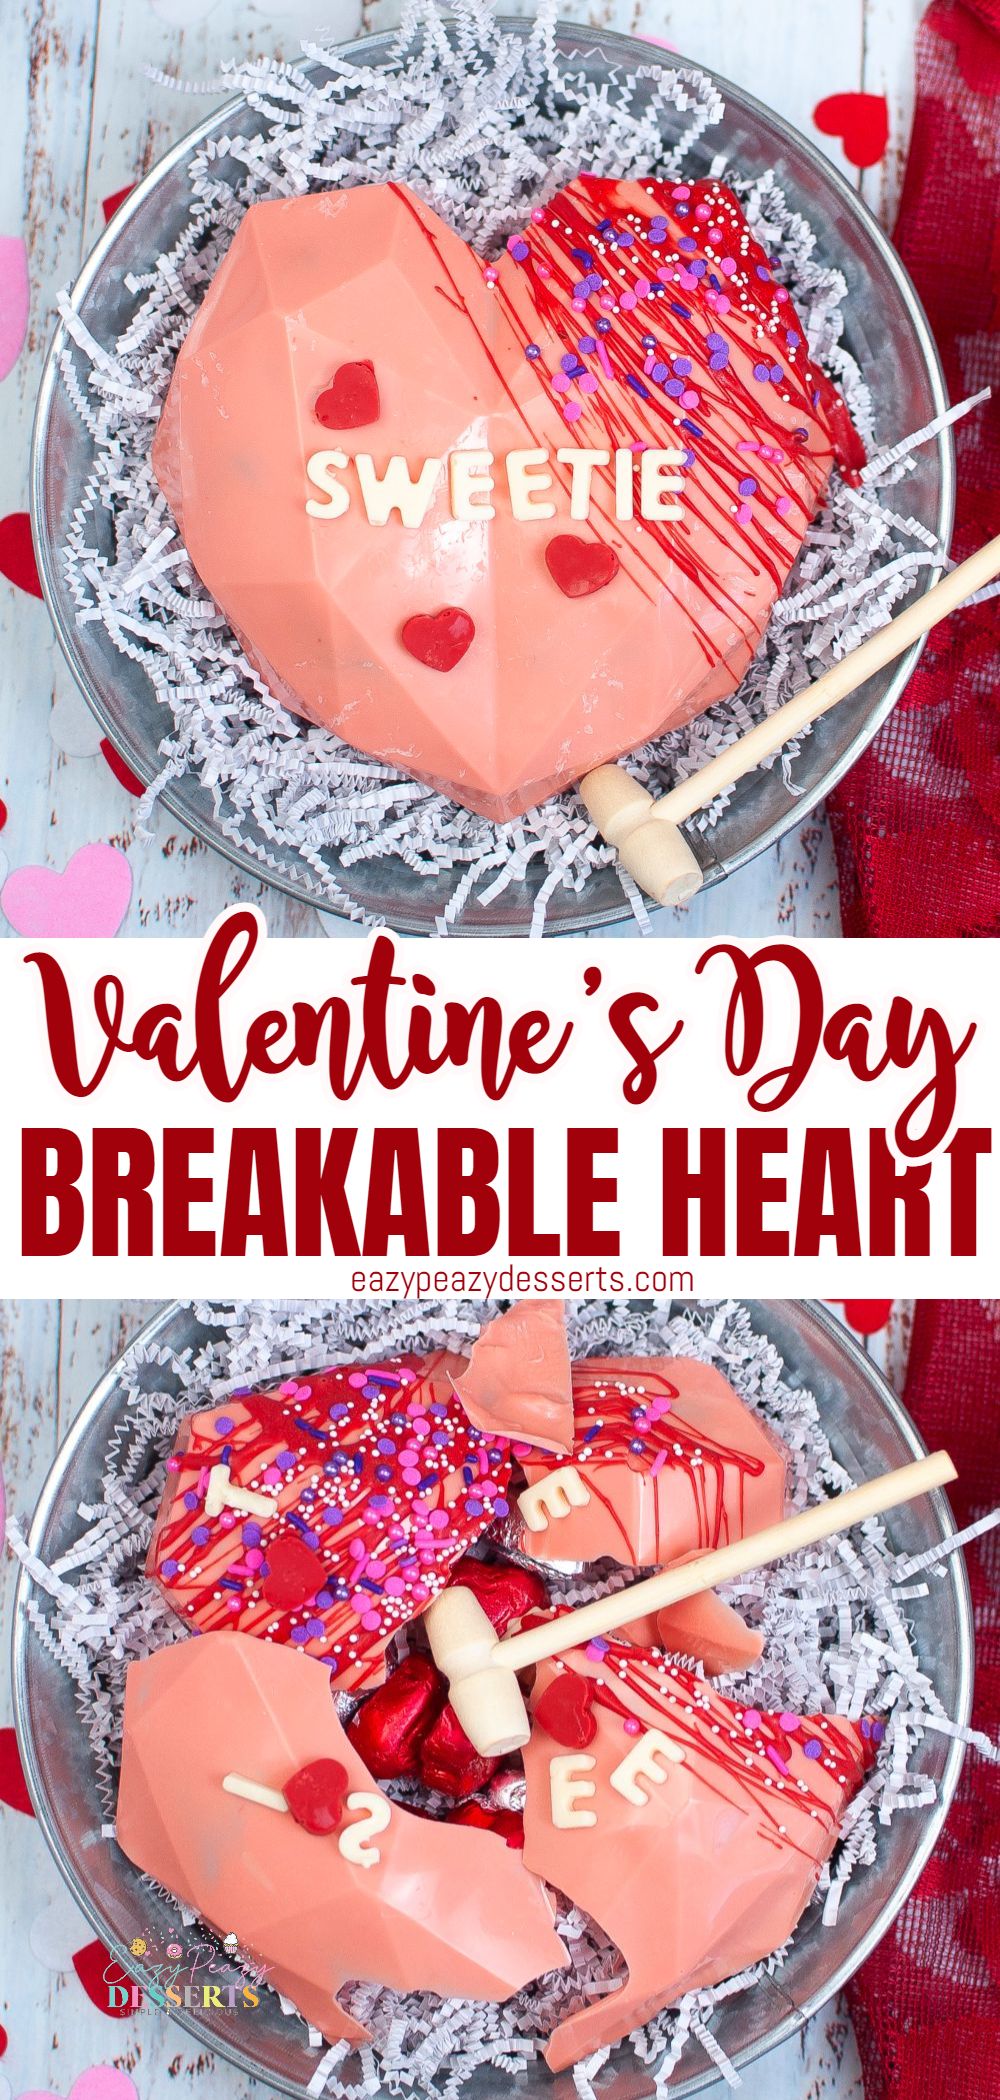 Photo collage of Valentine's day breakable heart